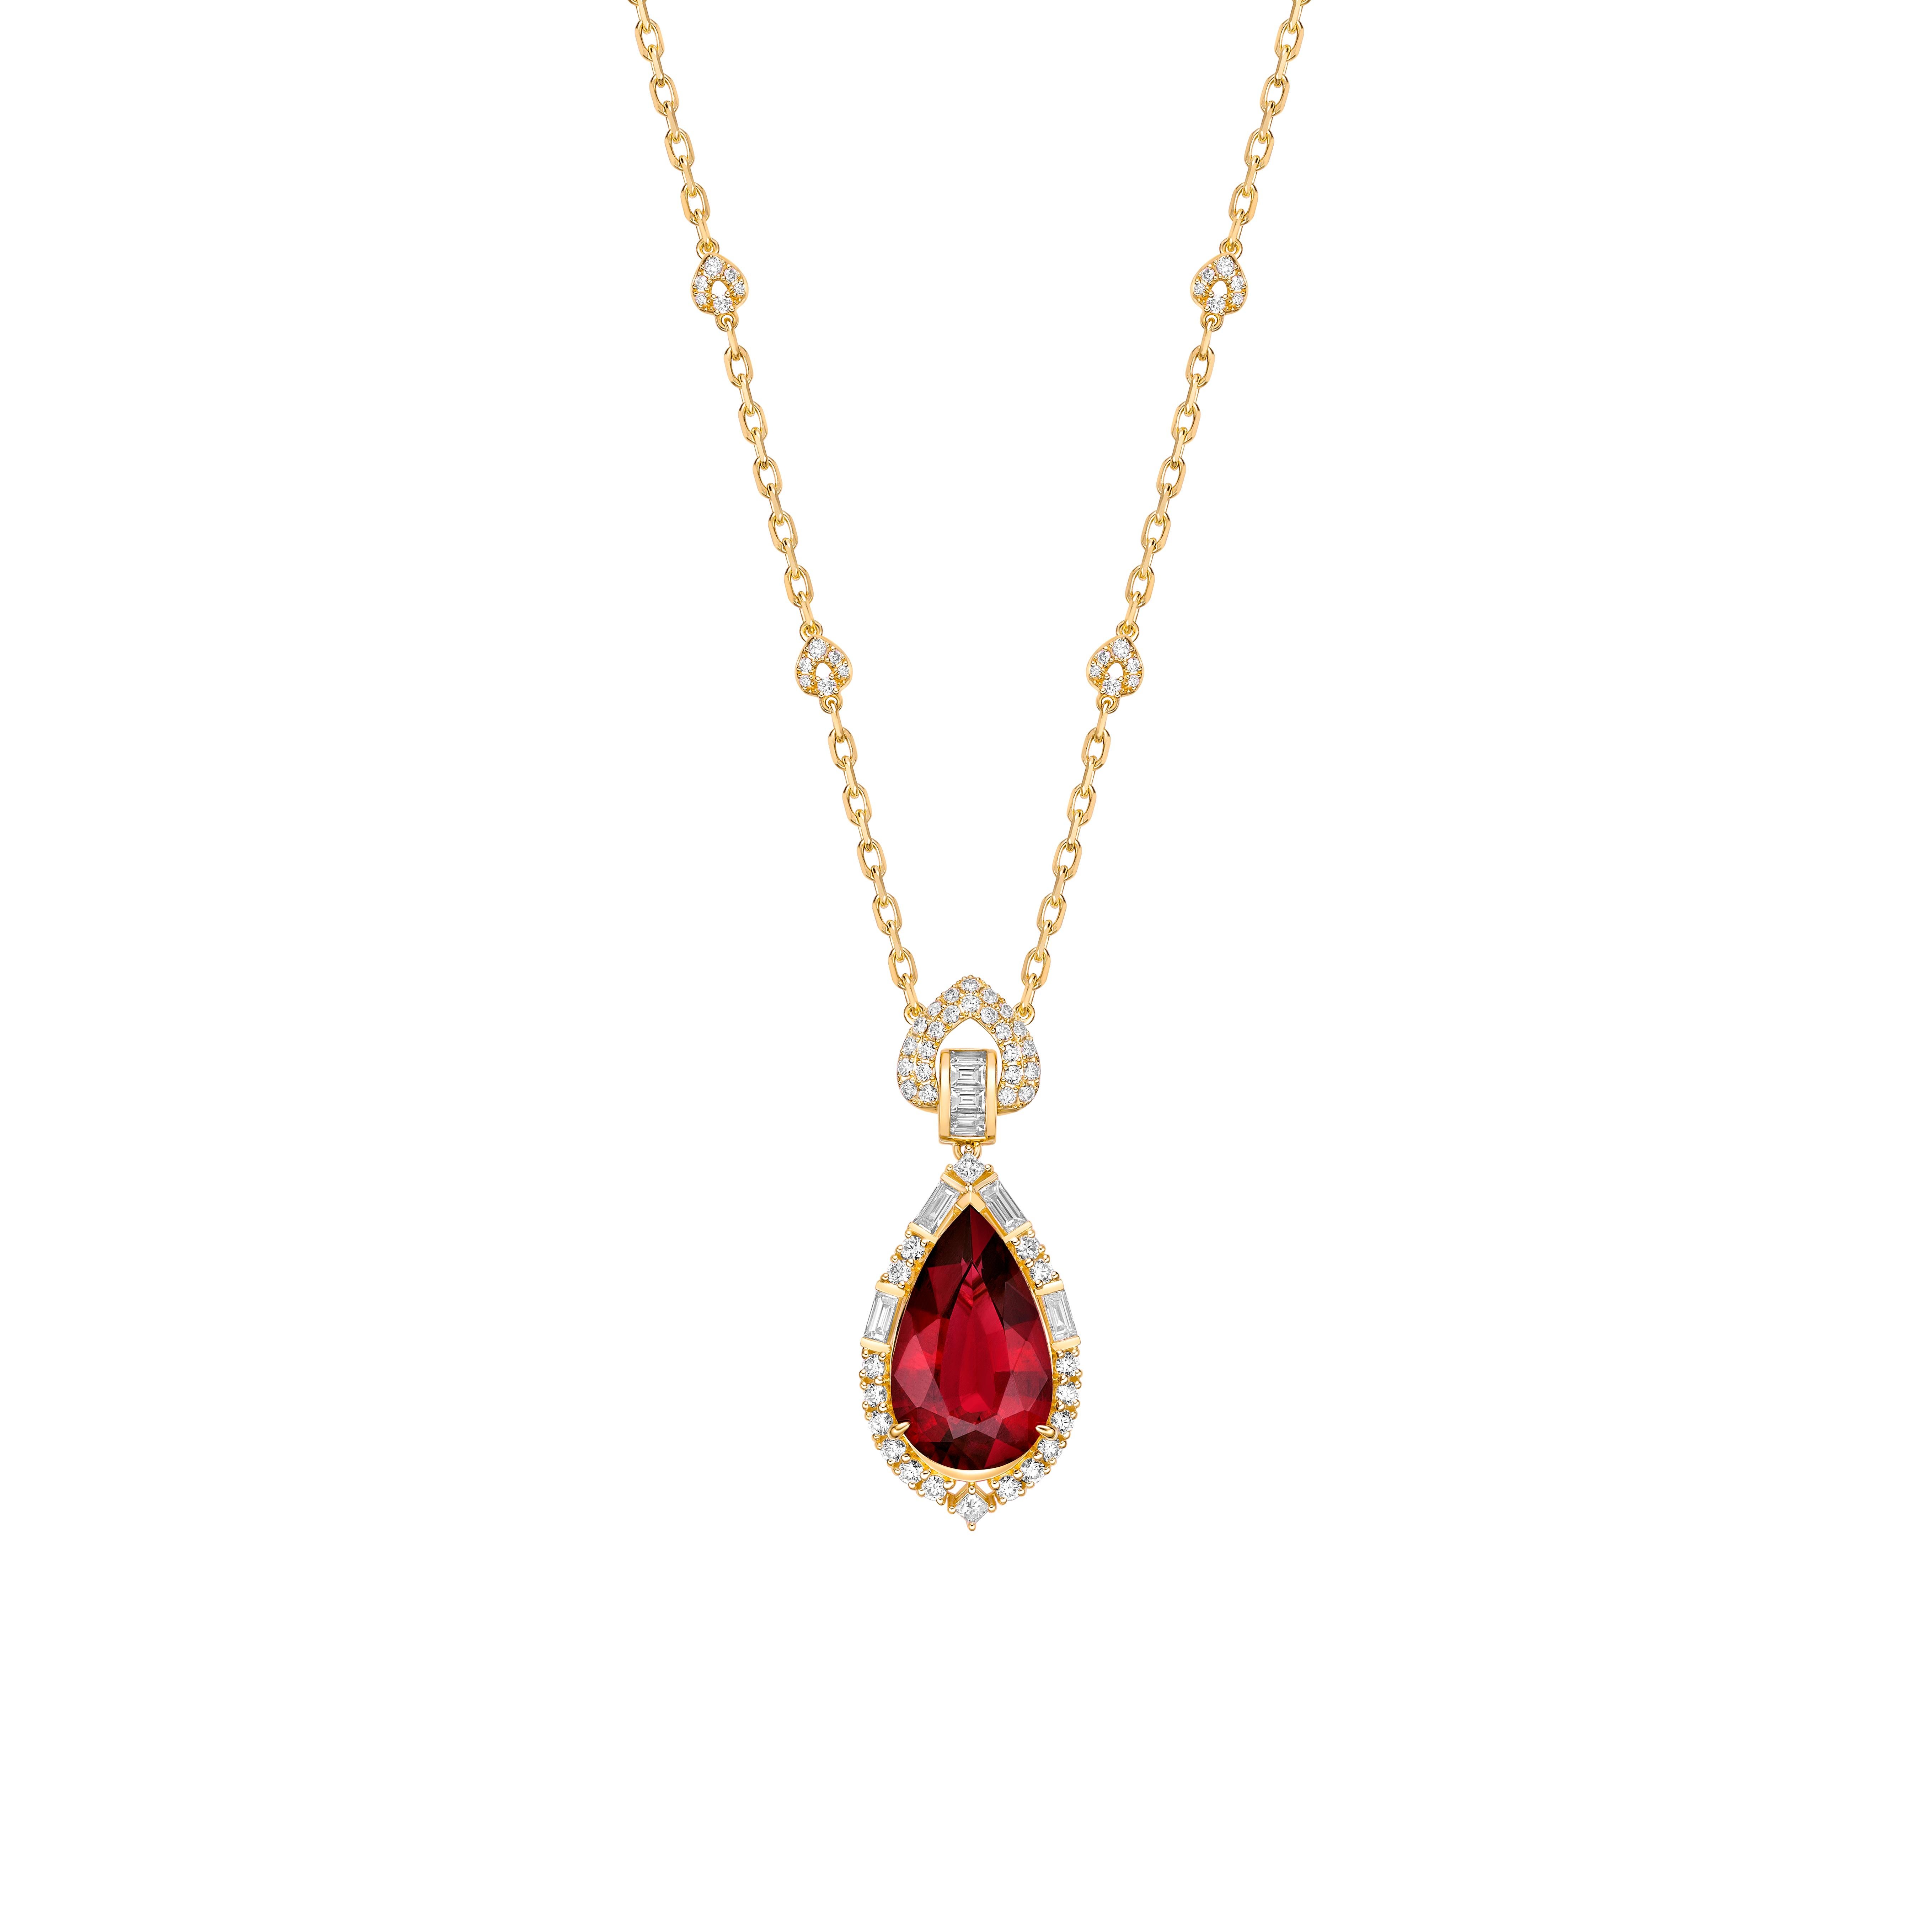 Contemporary 11.72 Carat Rubellite Necklace in 18Karat Yellow Gold with White Diamond For Sale